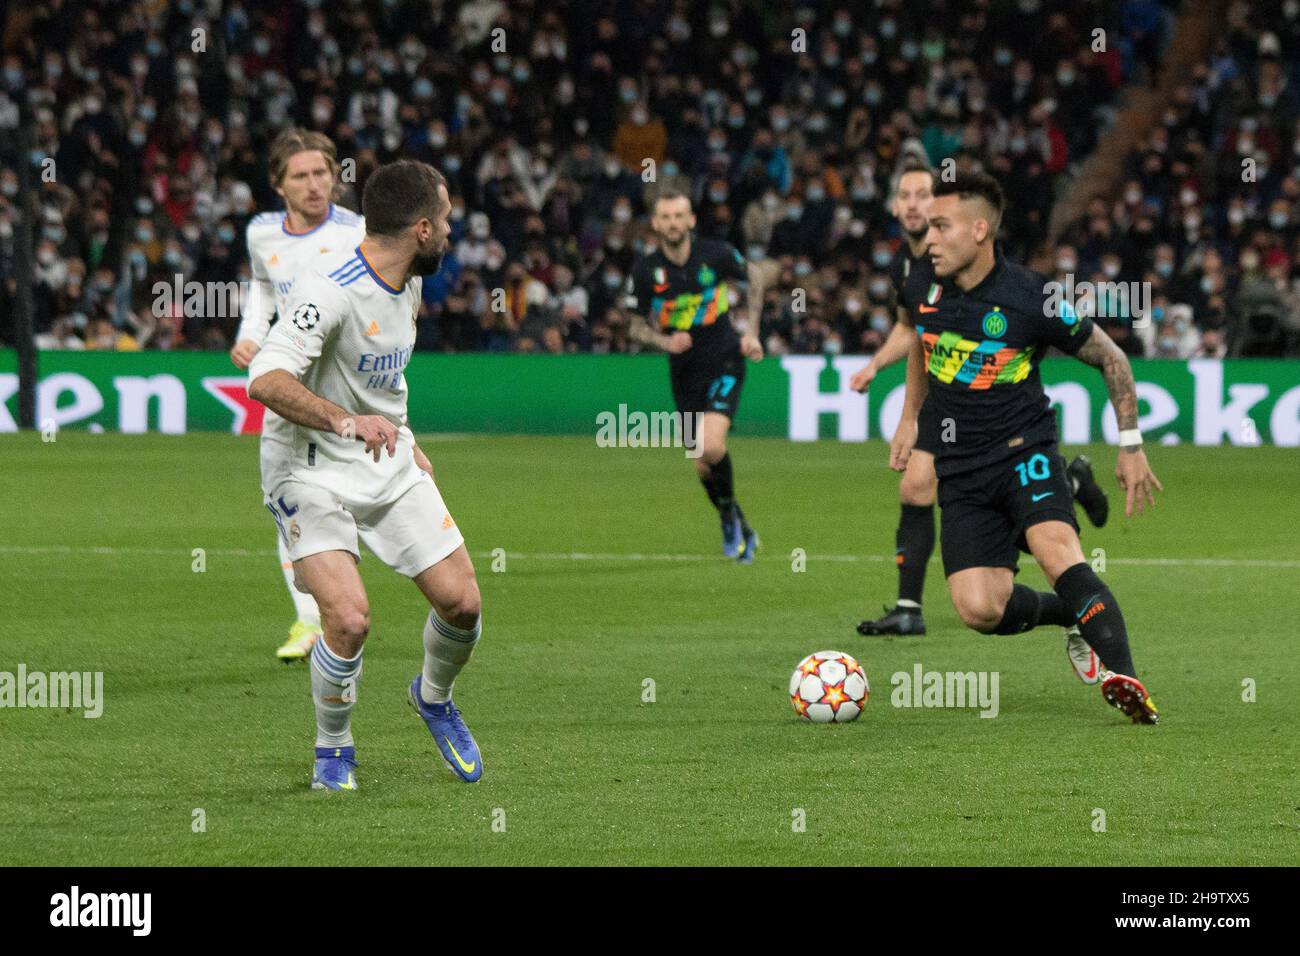 Madrid, Spain. 07th Dec, 2021. Carvajal (L)n and Lautaro Martinez (R).during the match between Real Madrid and Inter de Milan that finished with 2 to 0, victory of Real Madrid with goals of Toni Kroos and Asensio in Madrid, Spain on December 7, 2021. (Photo by Jorge Gonzalez/Pacific Press/Sipa USA) Credit: Sipa USA/Alamy Live News Stock Photo